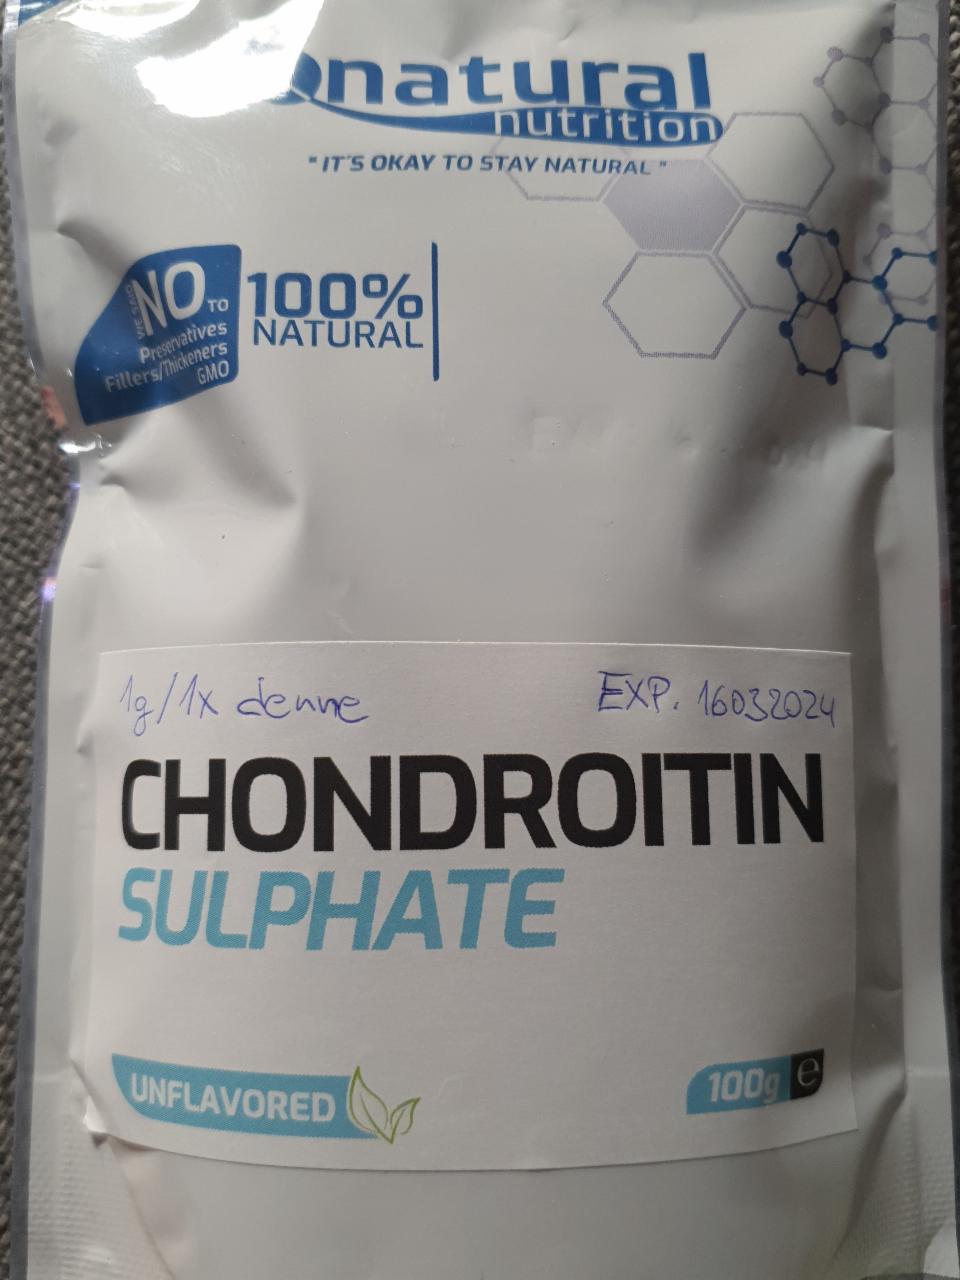 Fotografie - Chondroitin Sulphate Natural Nutrition